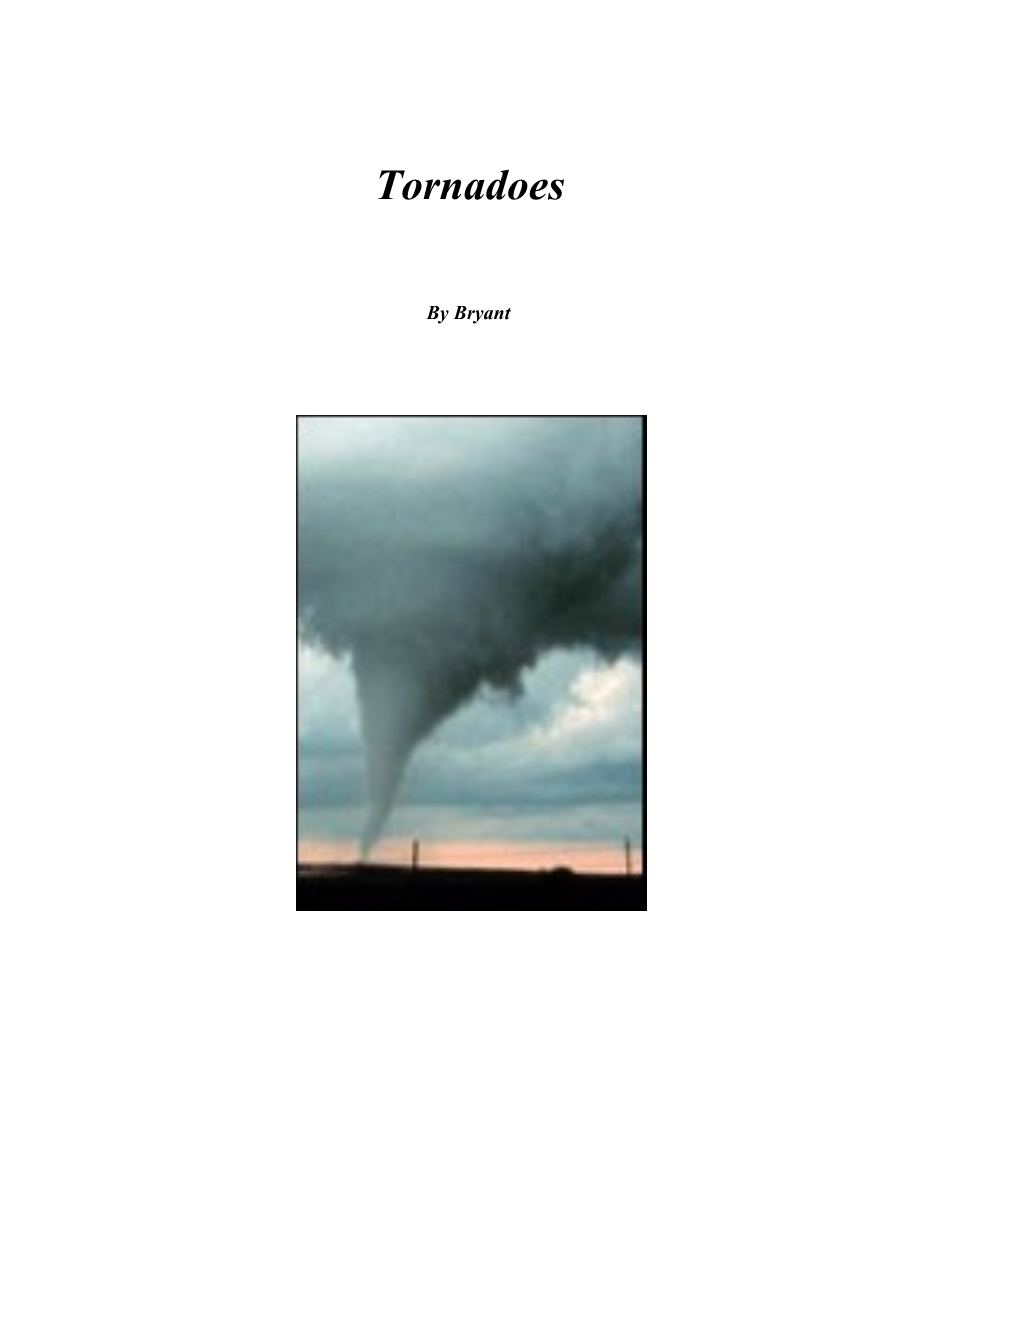 Tornadoes Are Destructive Forces of Nature and Are Most Common in the Eastern Part of The